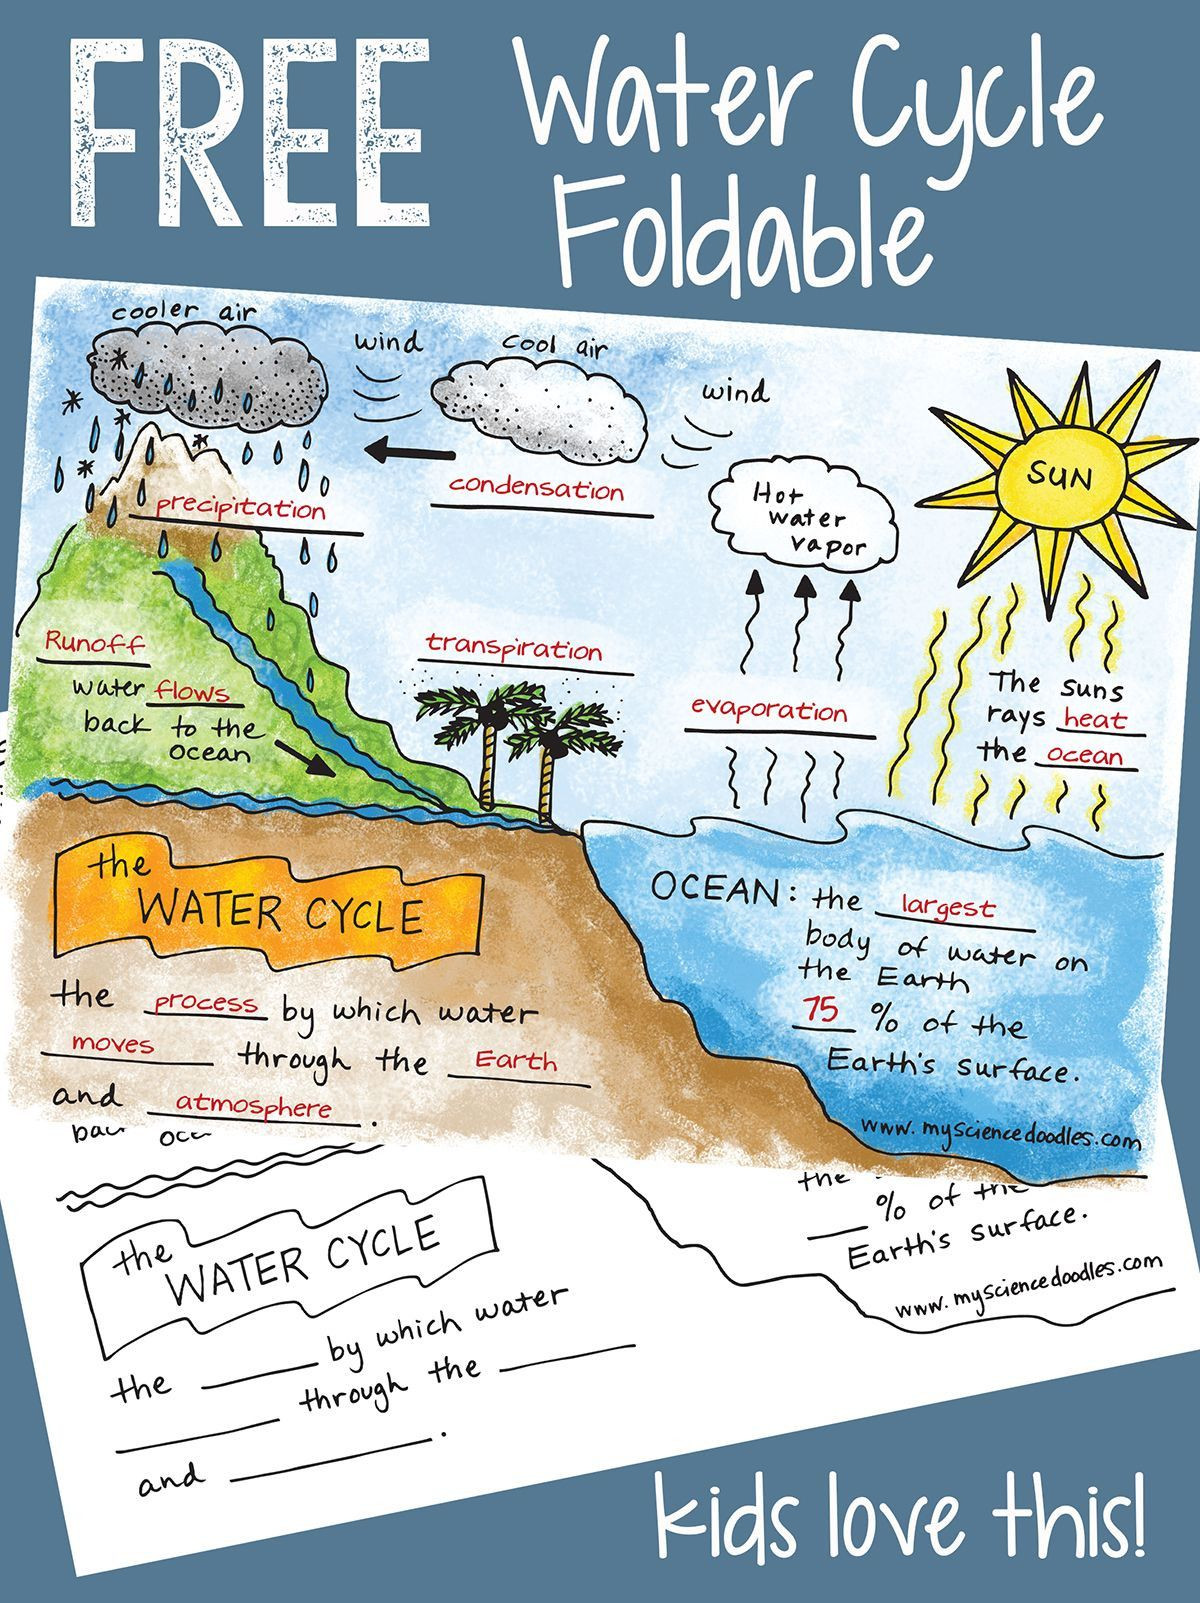 Water Cycle Worksheet Middle School Ac Plished Water Cycle Worksheet Middle School